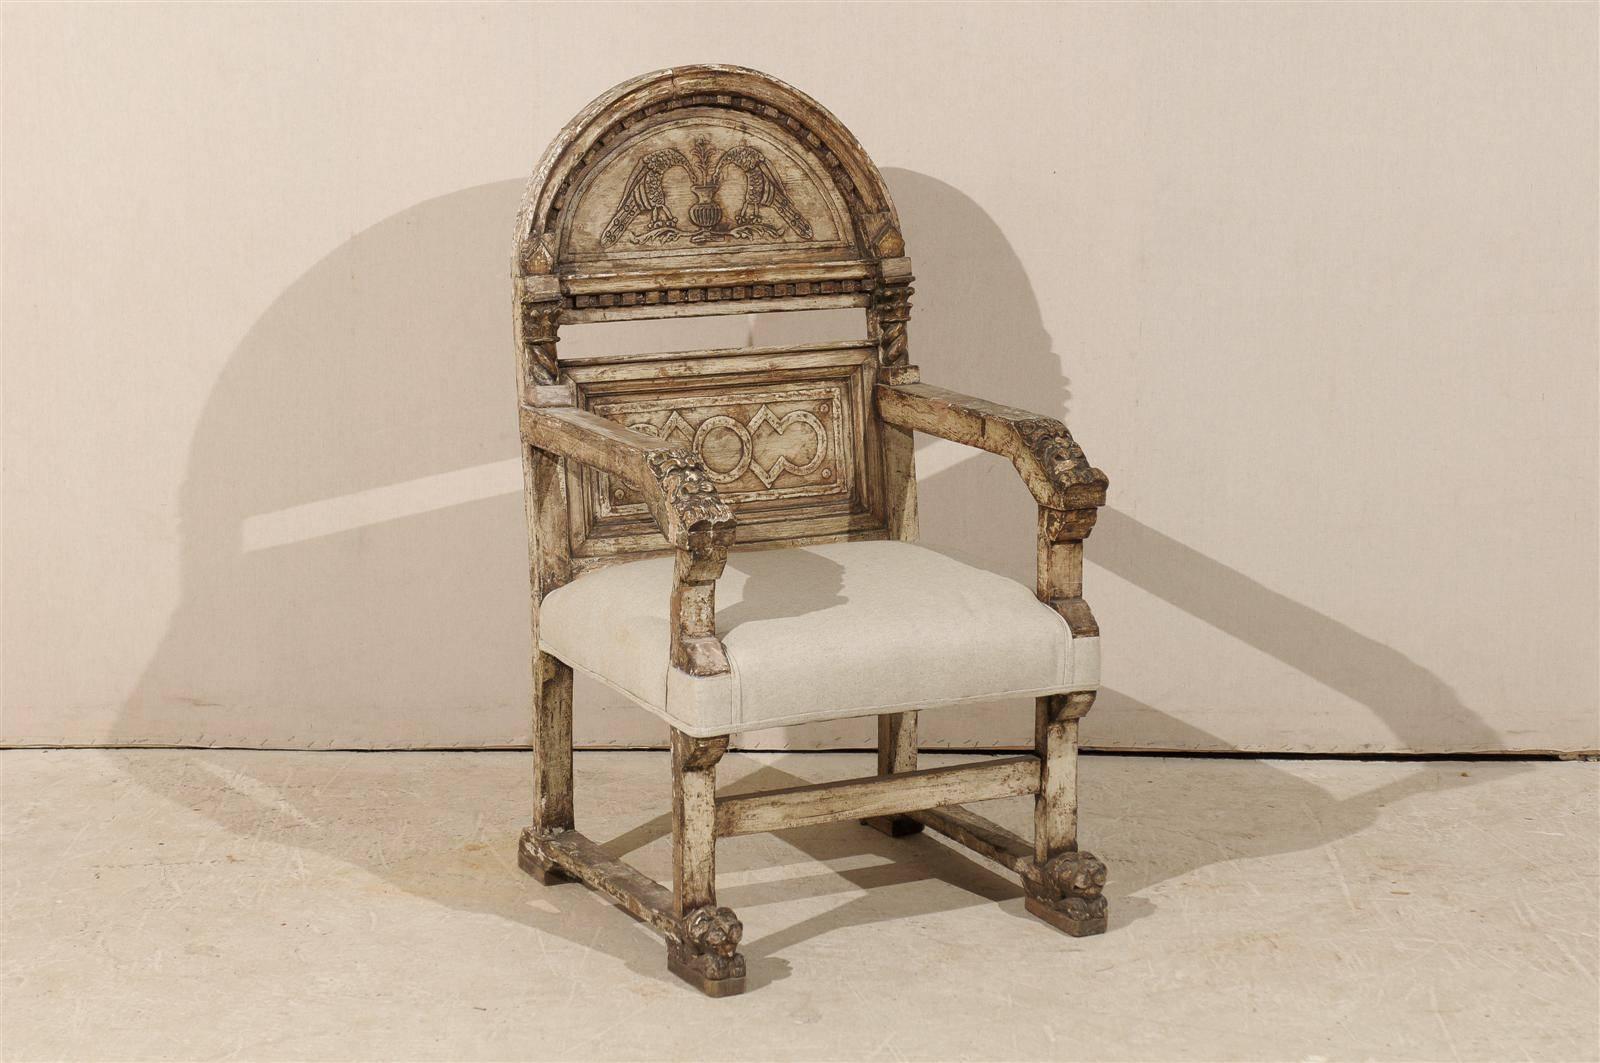 Gilt A Stately Italian Richly-Carved Wooden Chair with Elegant Aging, Early 19th C. 